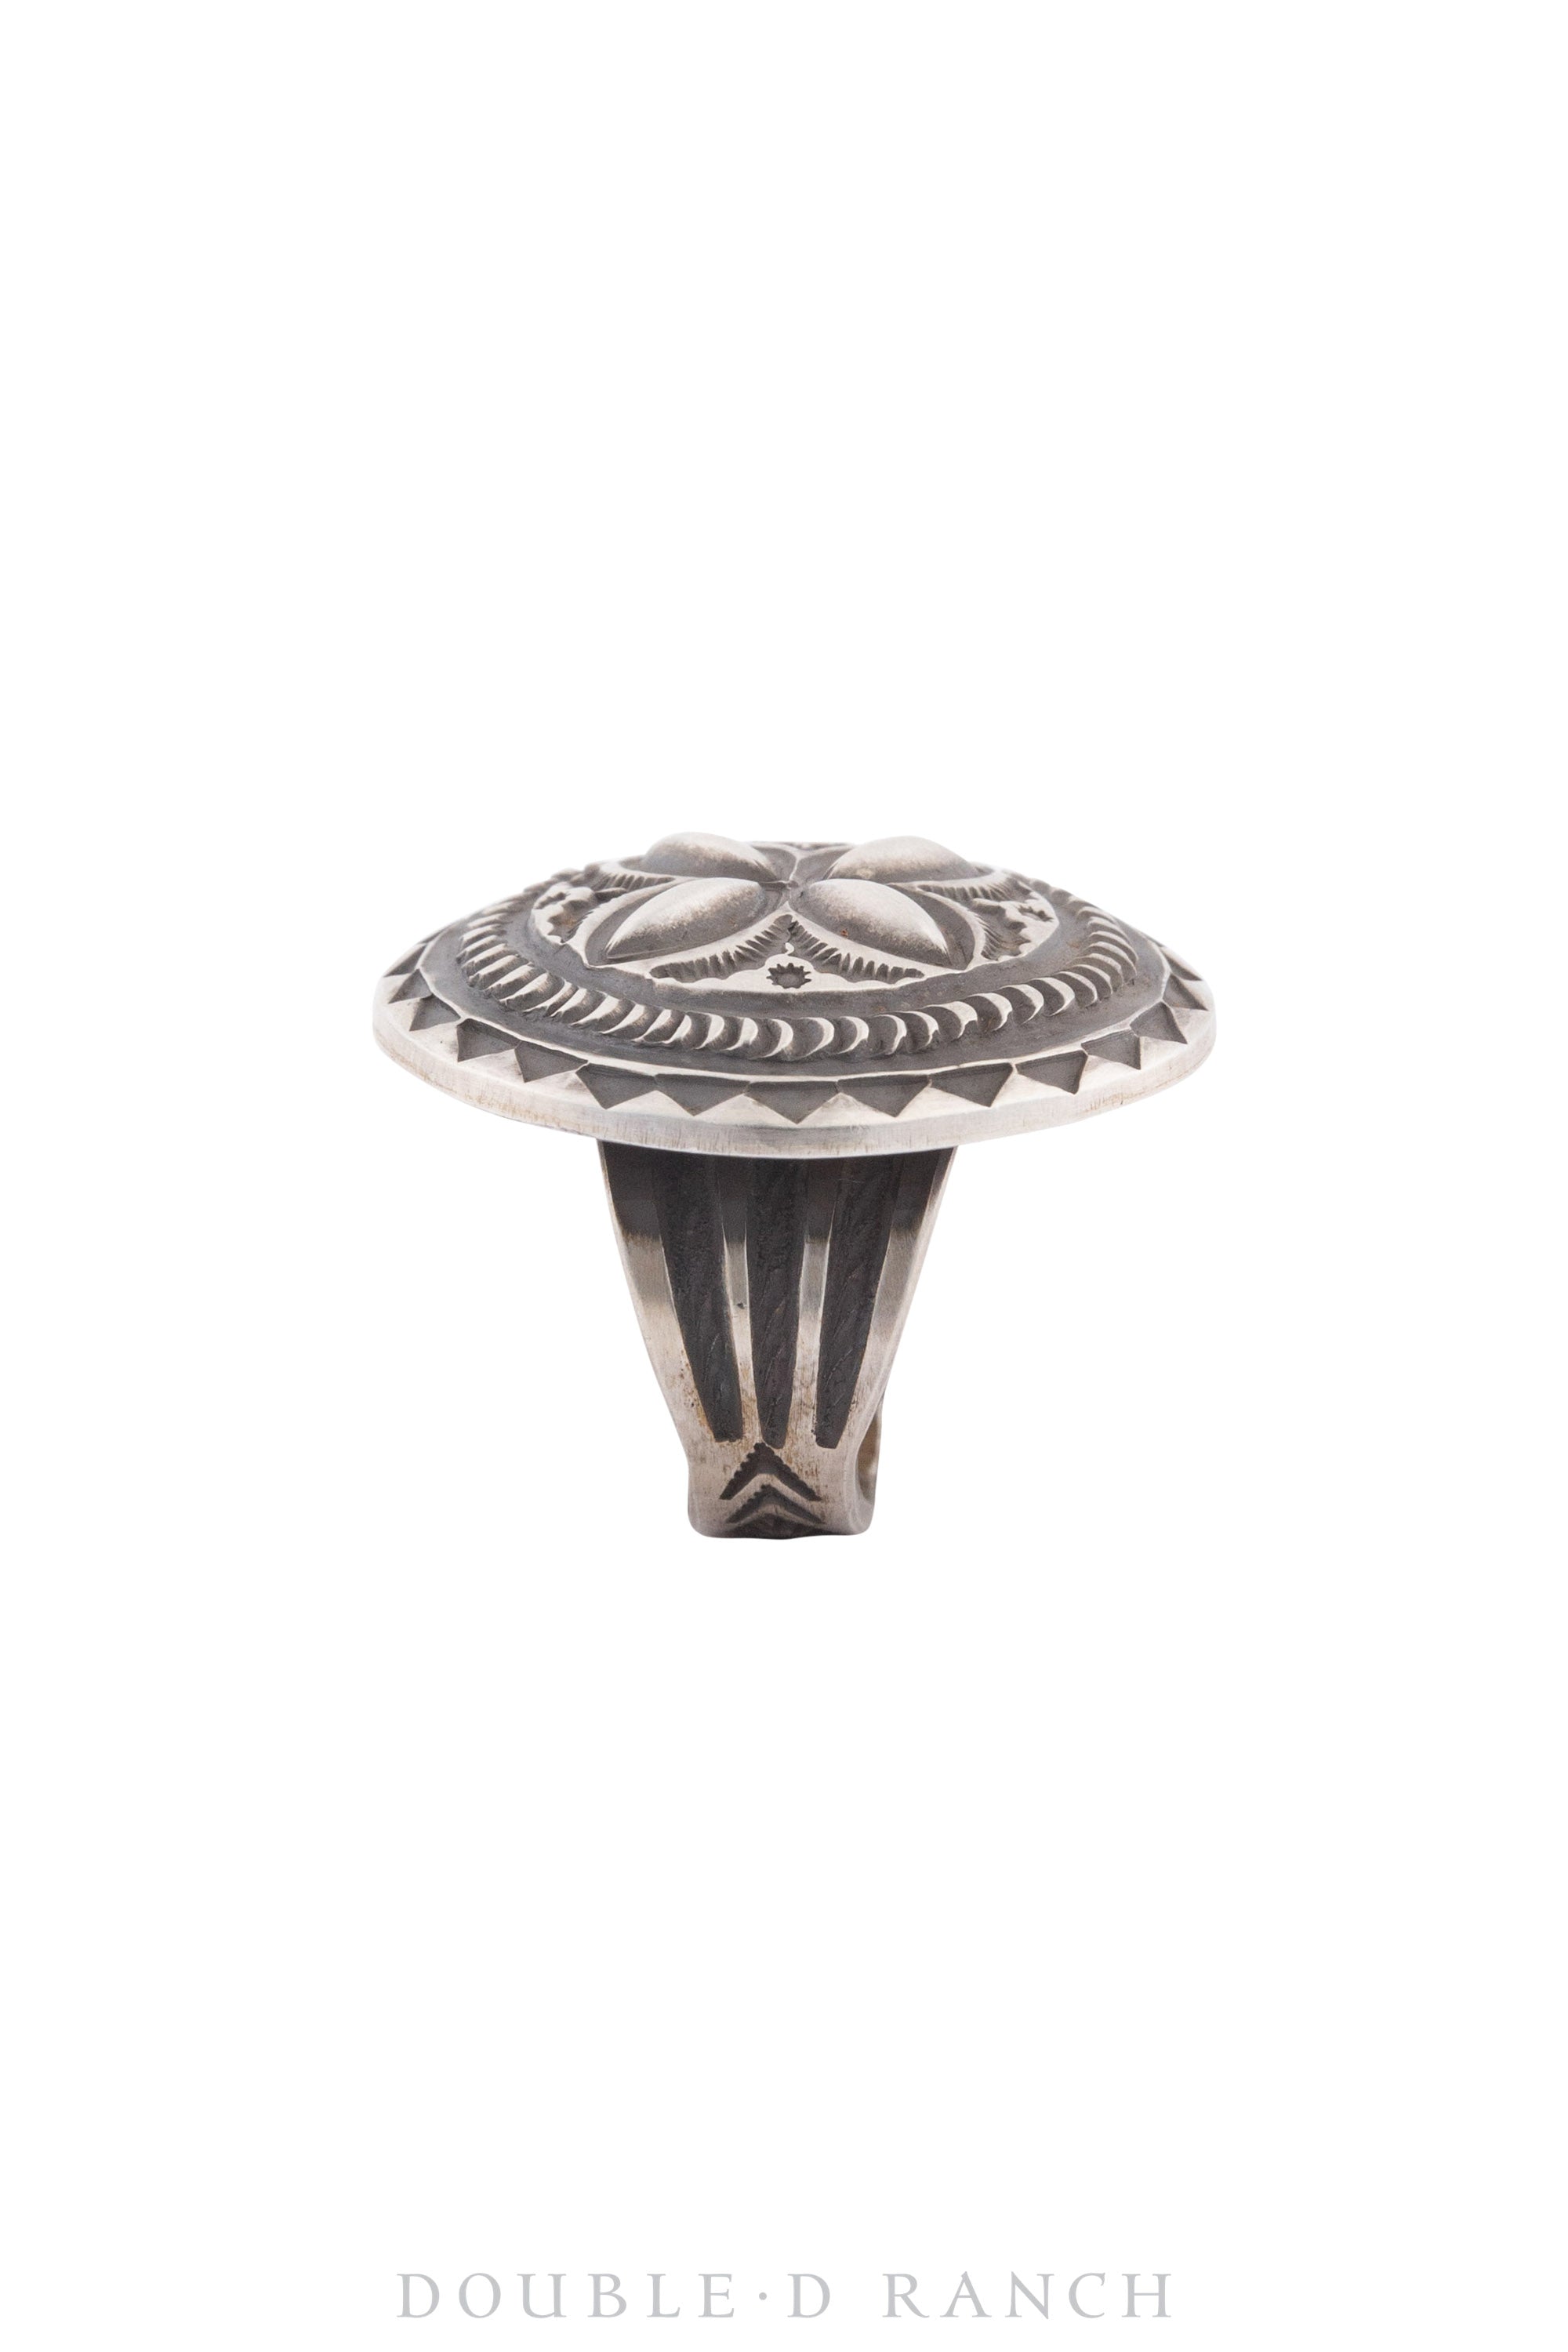 Ring, Concho, Sterling Silver, Stampwork, Hallmark, Contemporary, 1281